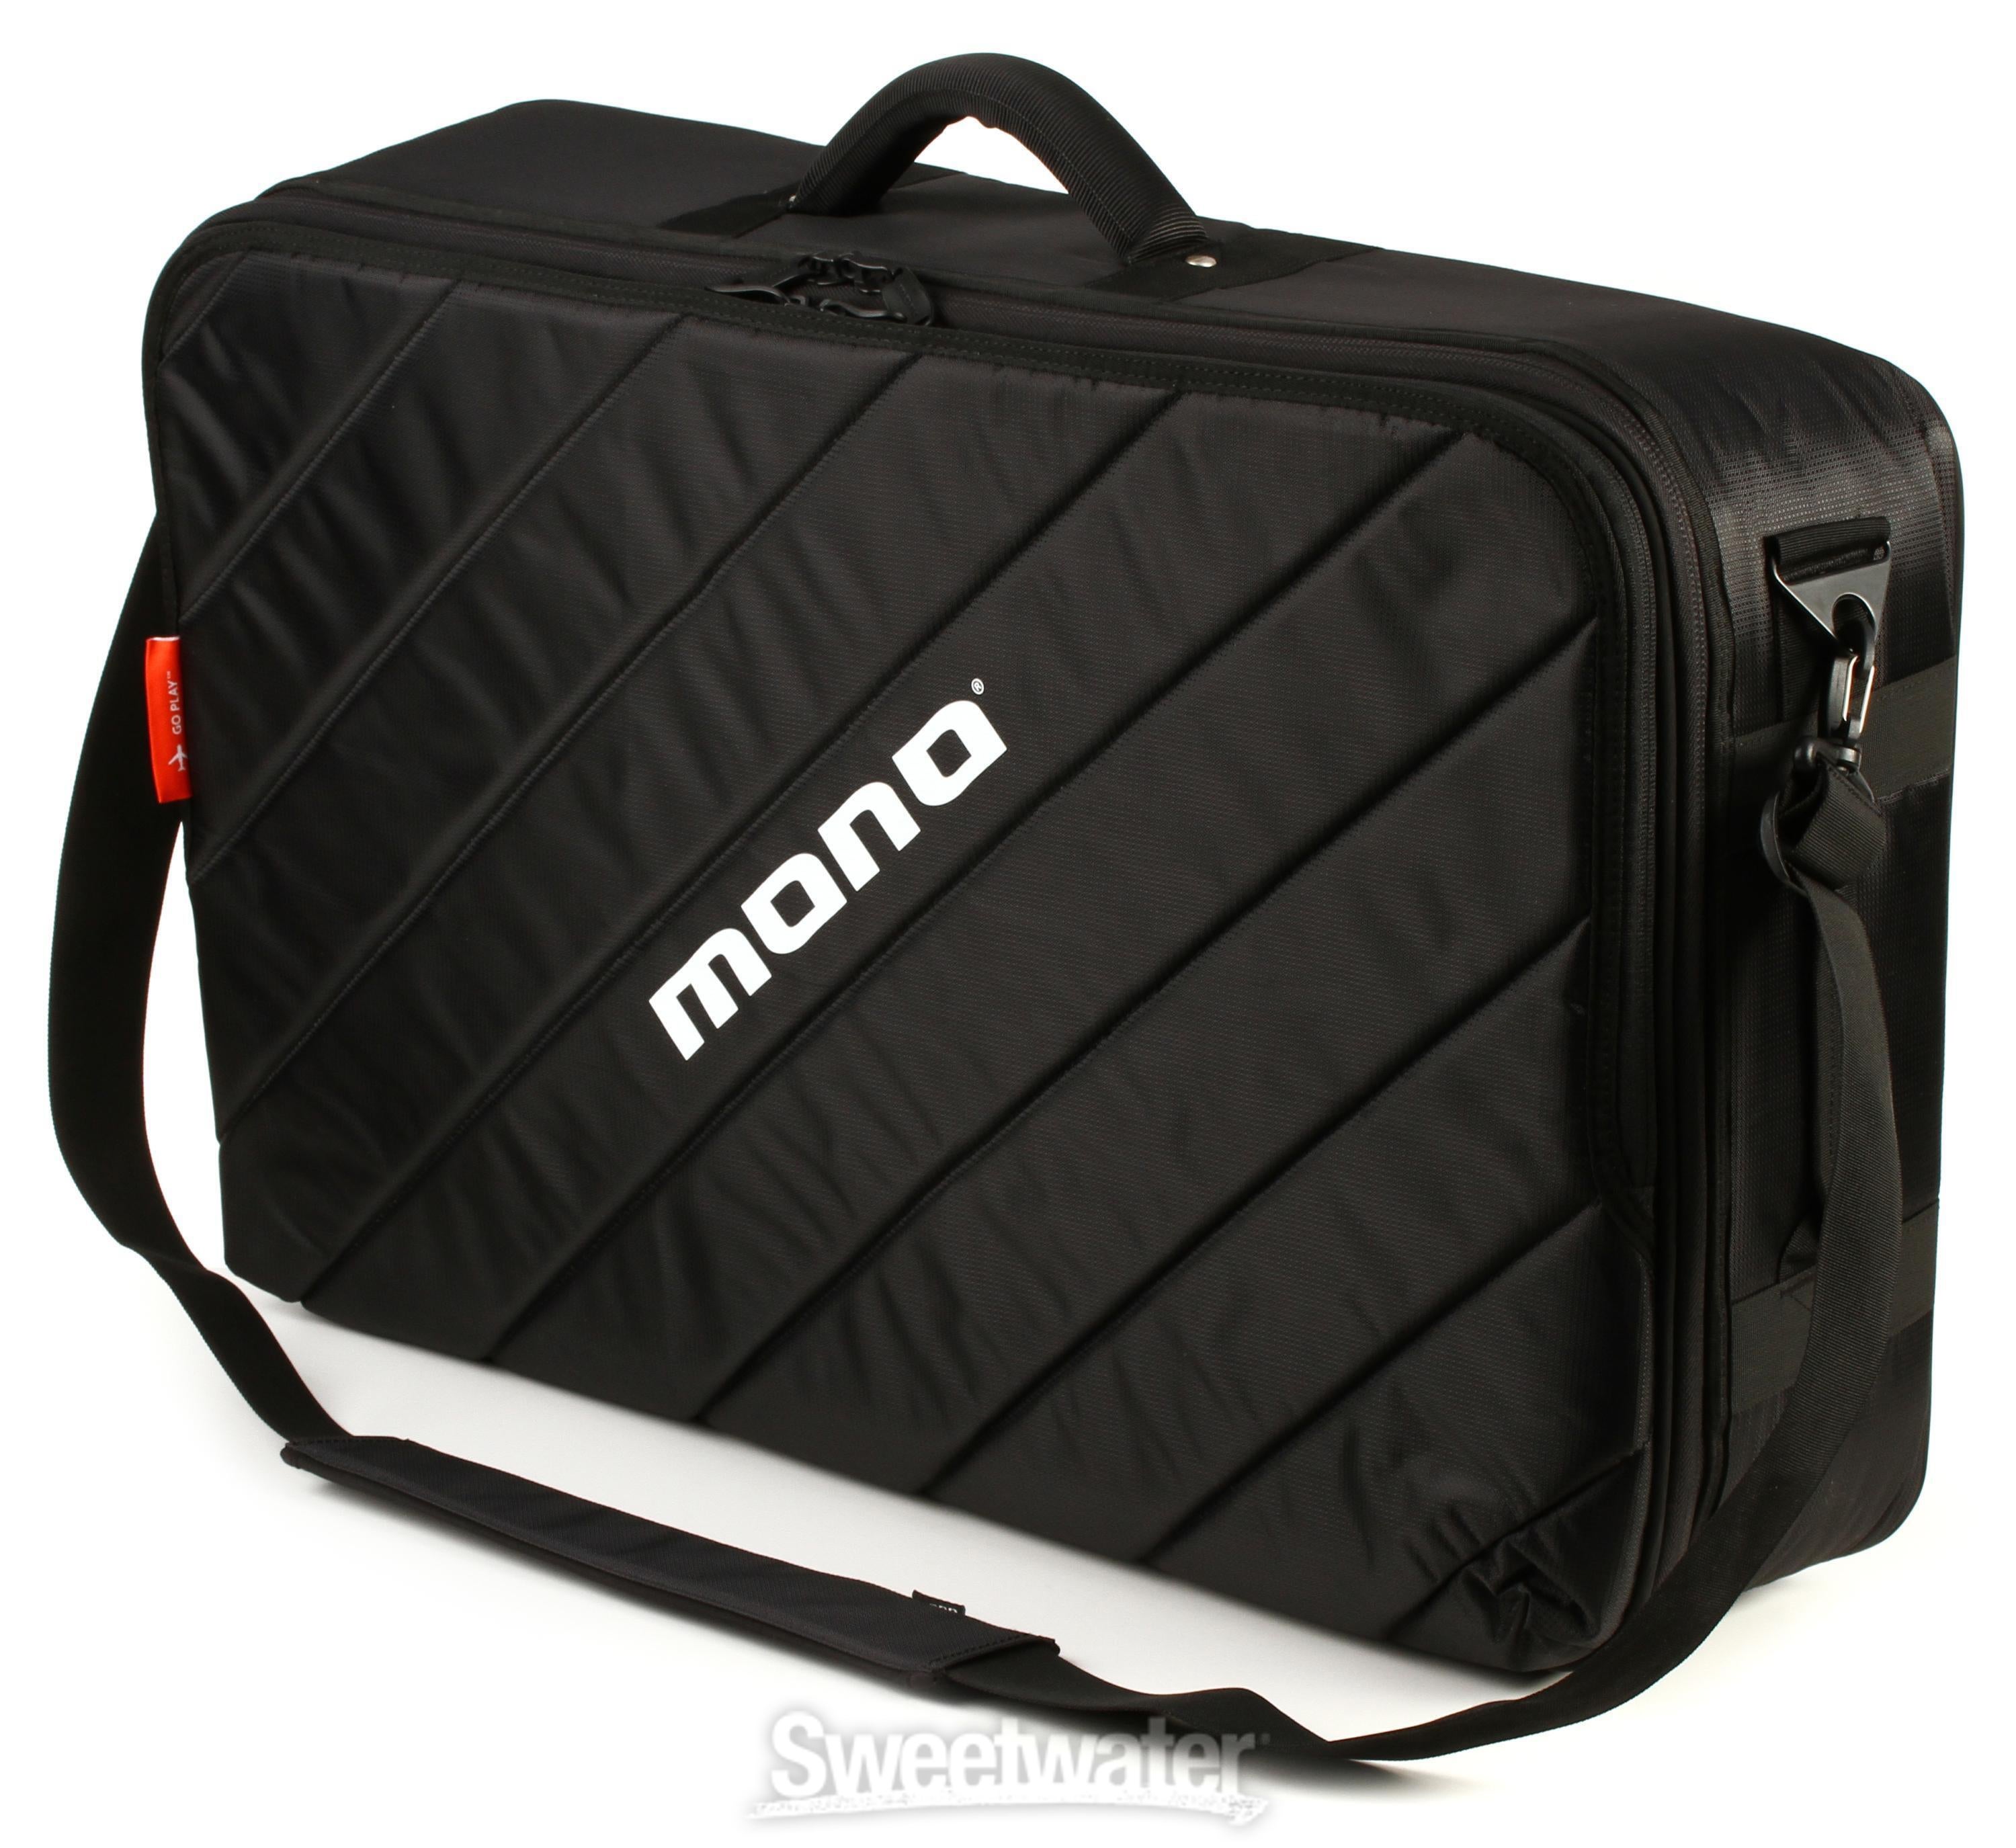 MONO Tour 2.0 Accessory Case | Sweetwater